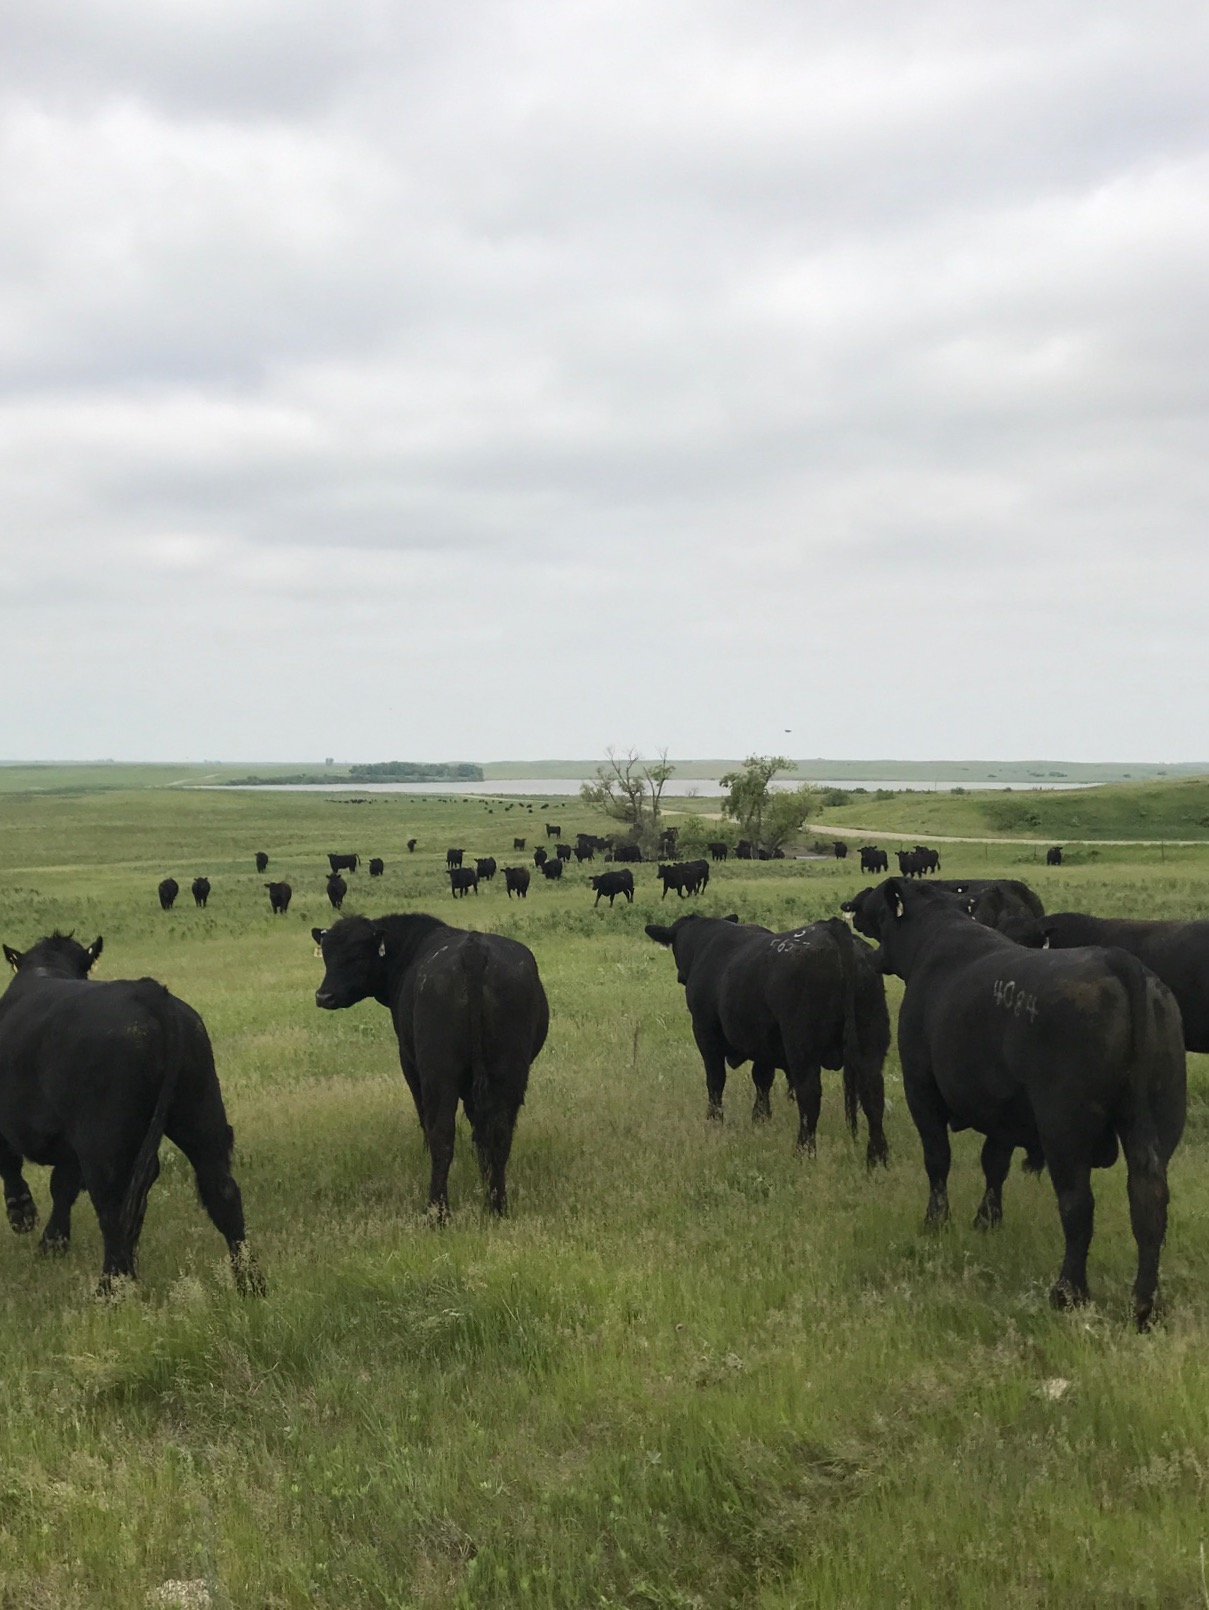 Afternoon Ag News, May 18, 2021: “Mineral Nutrition for the Beef Cow Herd”